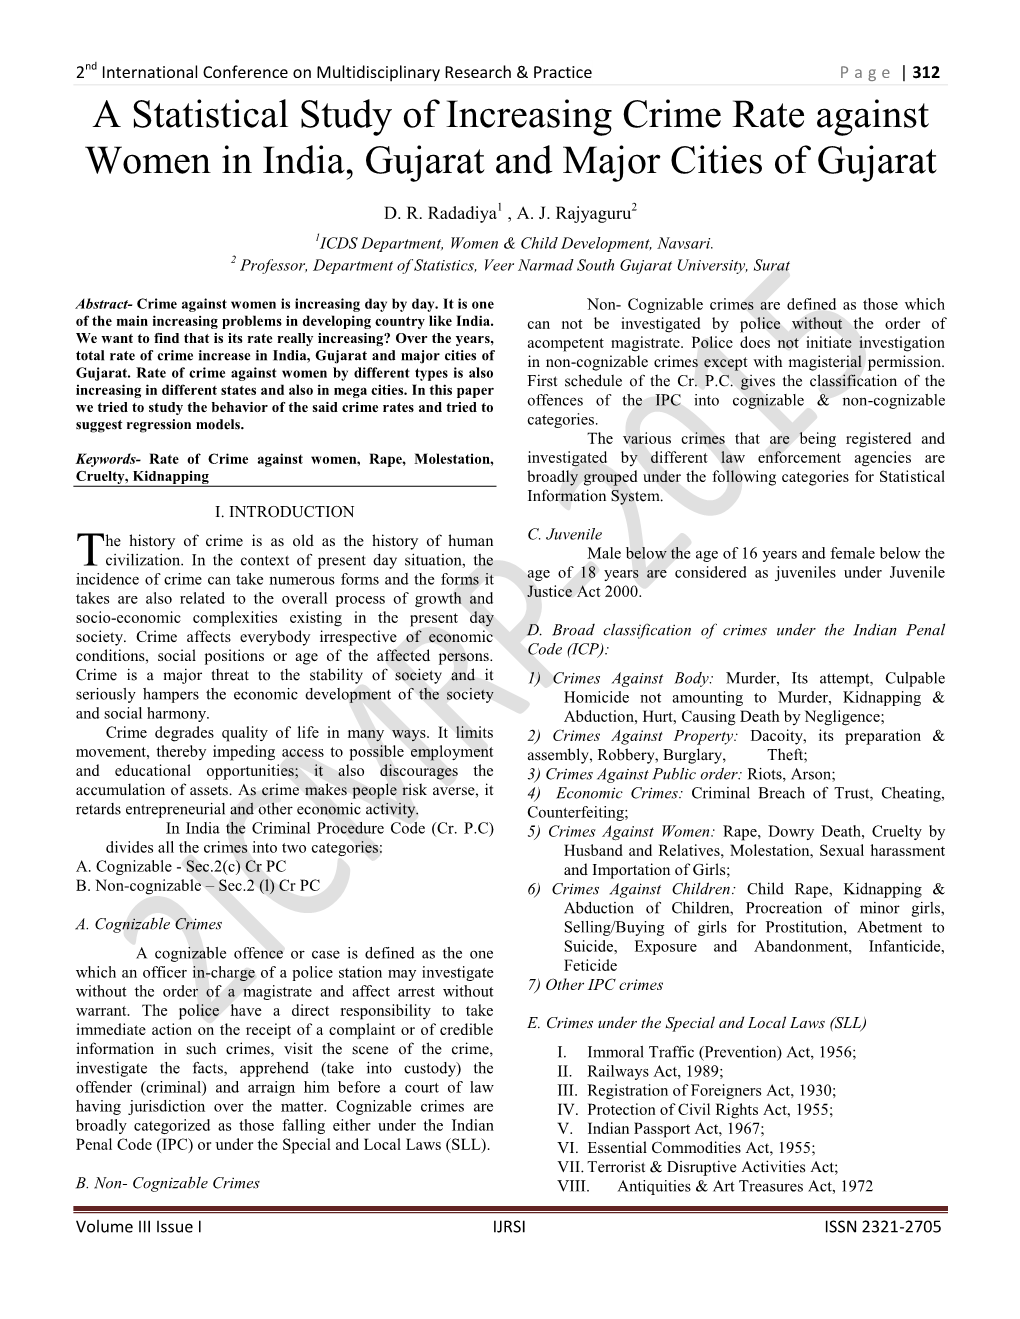 A Statistical Study of Increasing Crime Rate Against Women in India, Gujarat and Major Cities of Gujarat